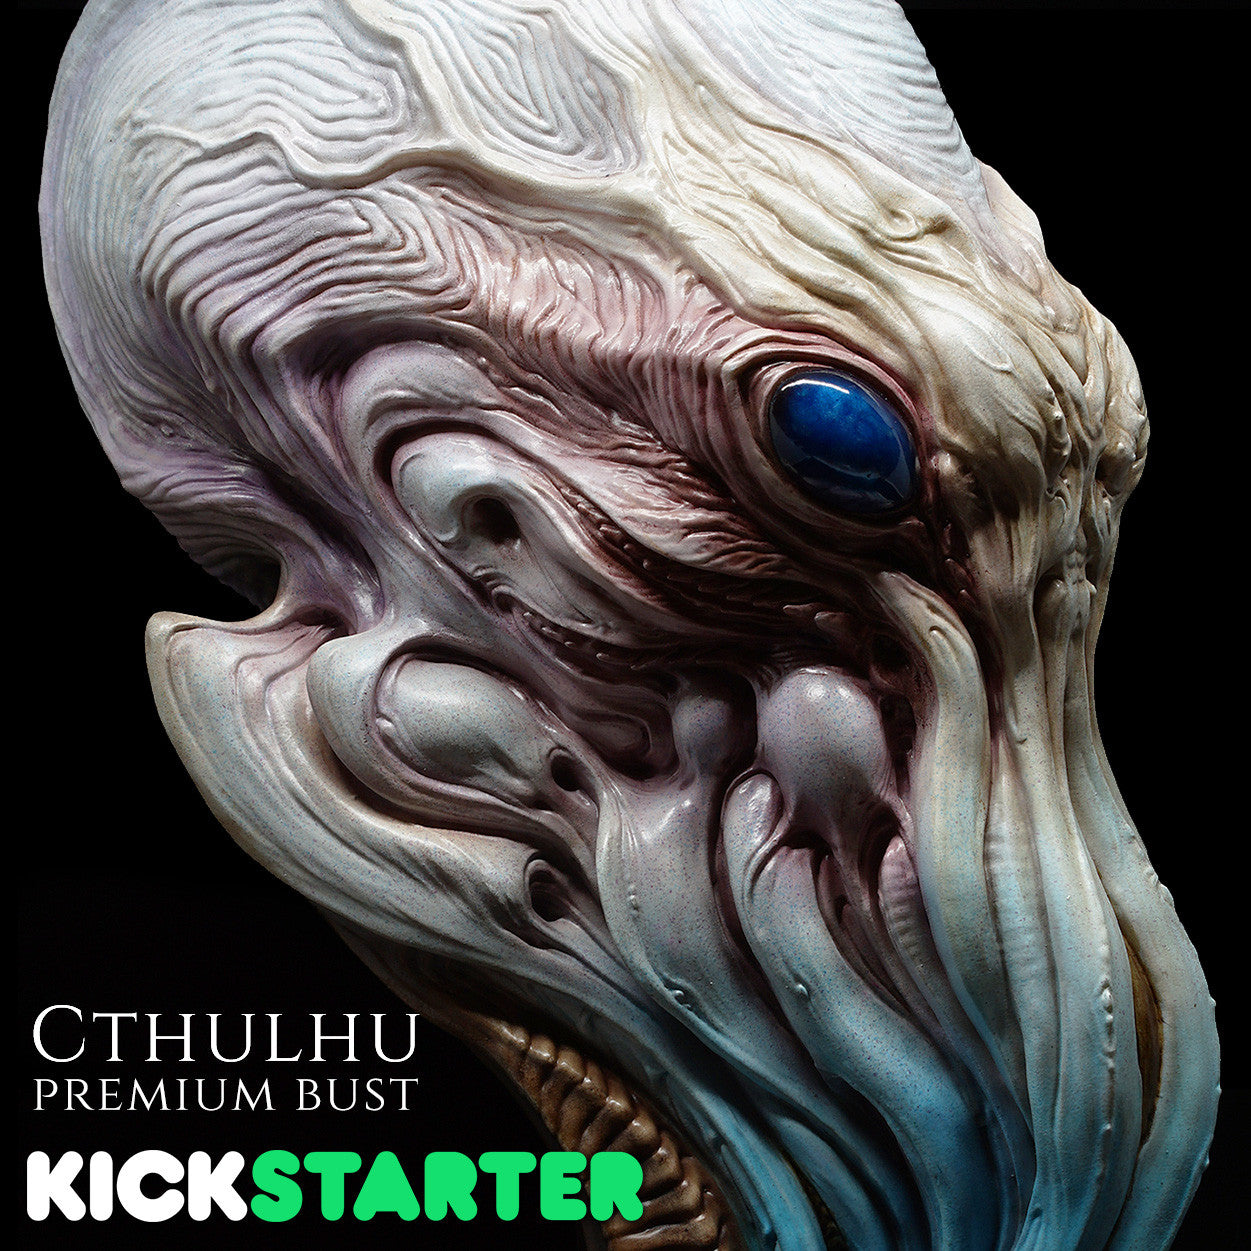 Cthulhu Kickstarter Successfully Funded!